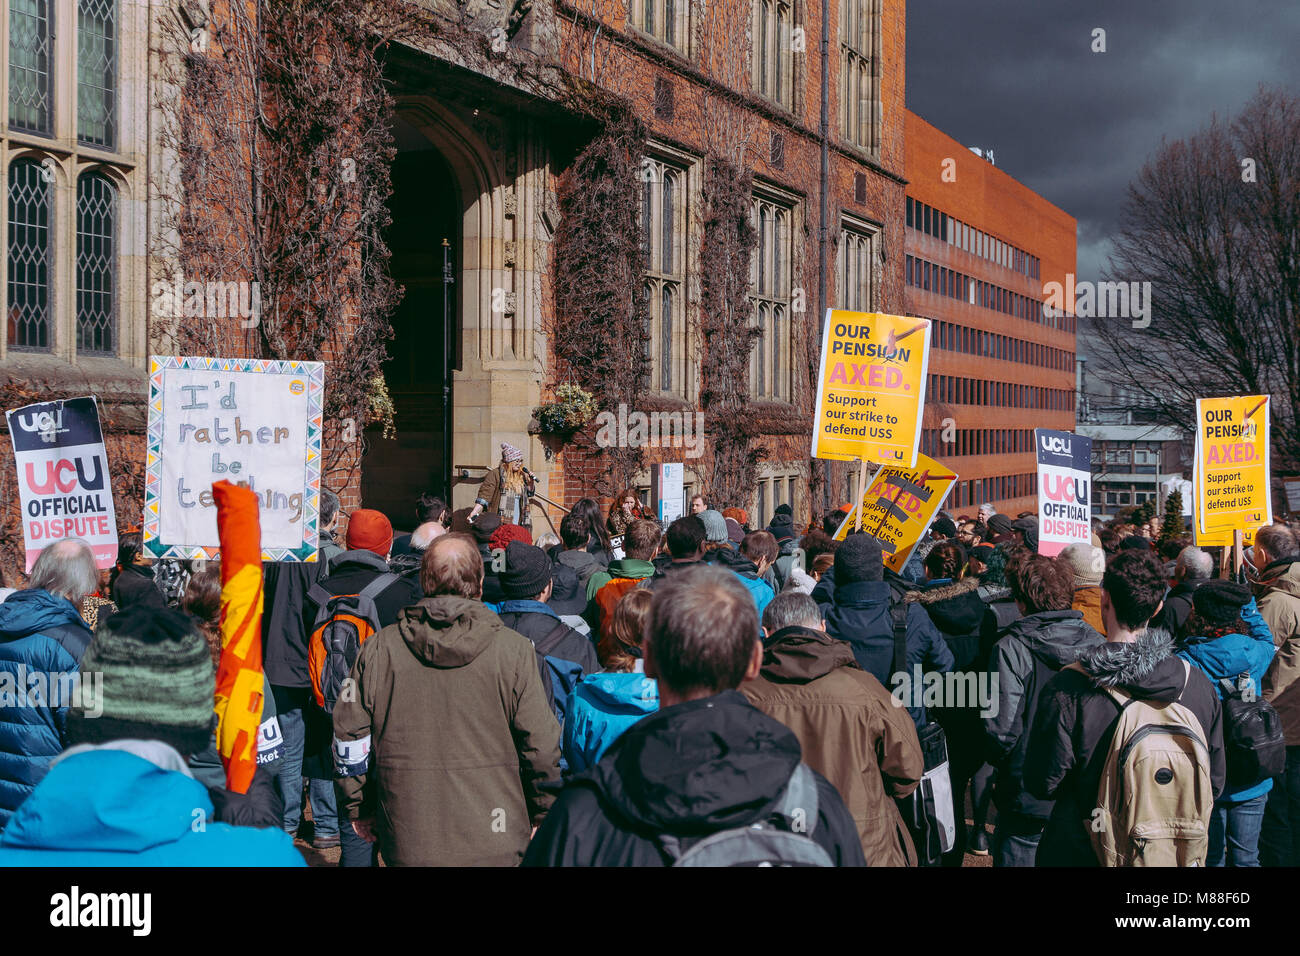 Sheffield, UK. 16th March, 2018. University of Sheffield, UK. Universities and Colleges Union rally at Sheffield University. Rally in front of Firth Court signifying last day of current planned strikes in relation to ongoing dispute over further education pensions. Credit: Ashley Mayes/Alamy Live News Stock Photo